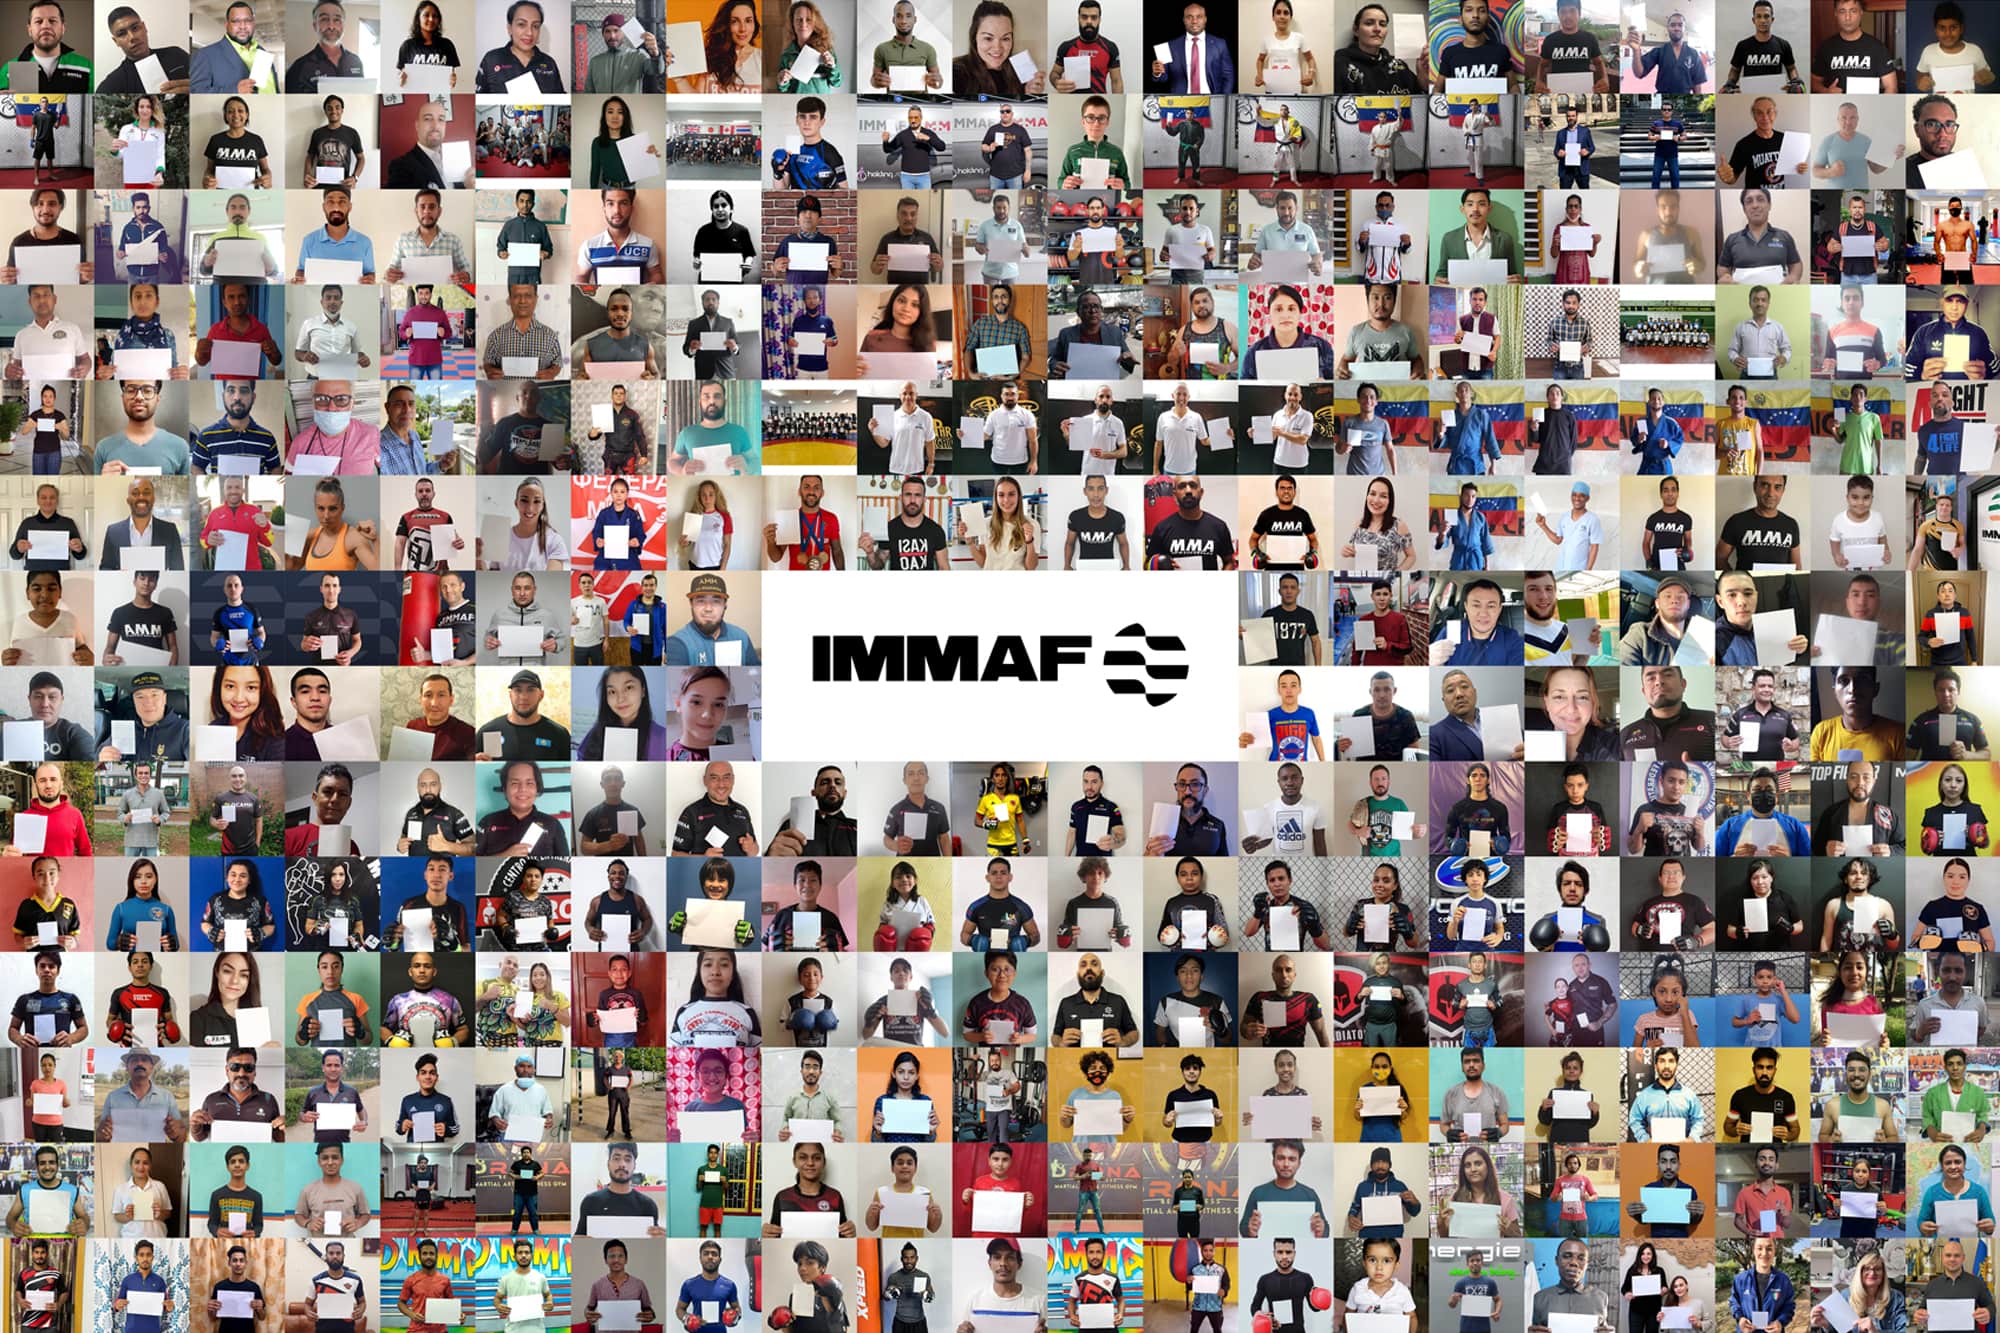 IMMAF gathers over 800 portraits to celebrate 2021 White Card Day